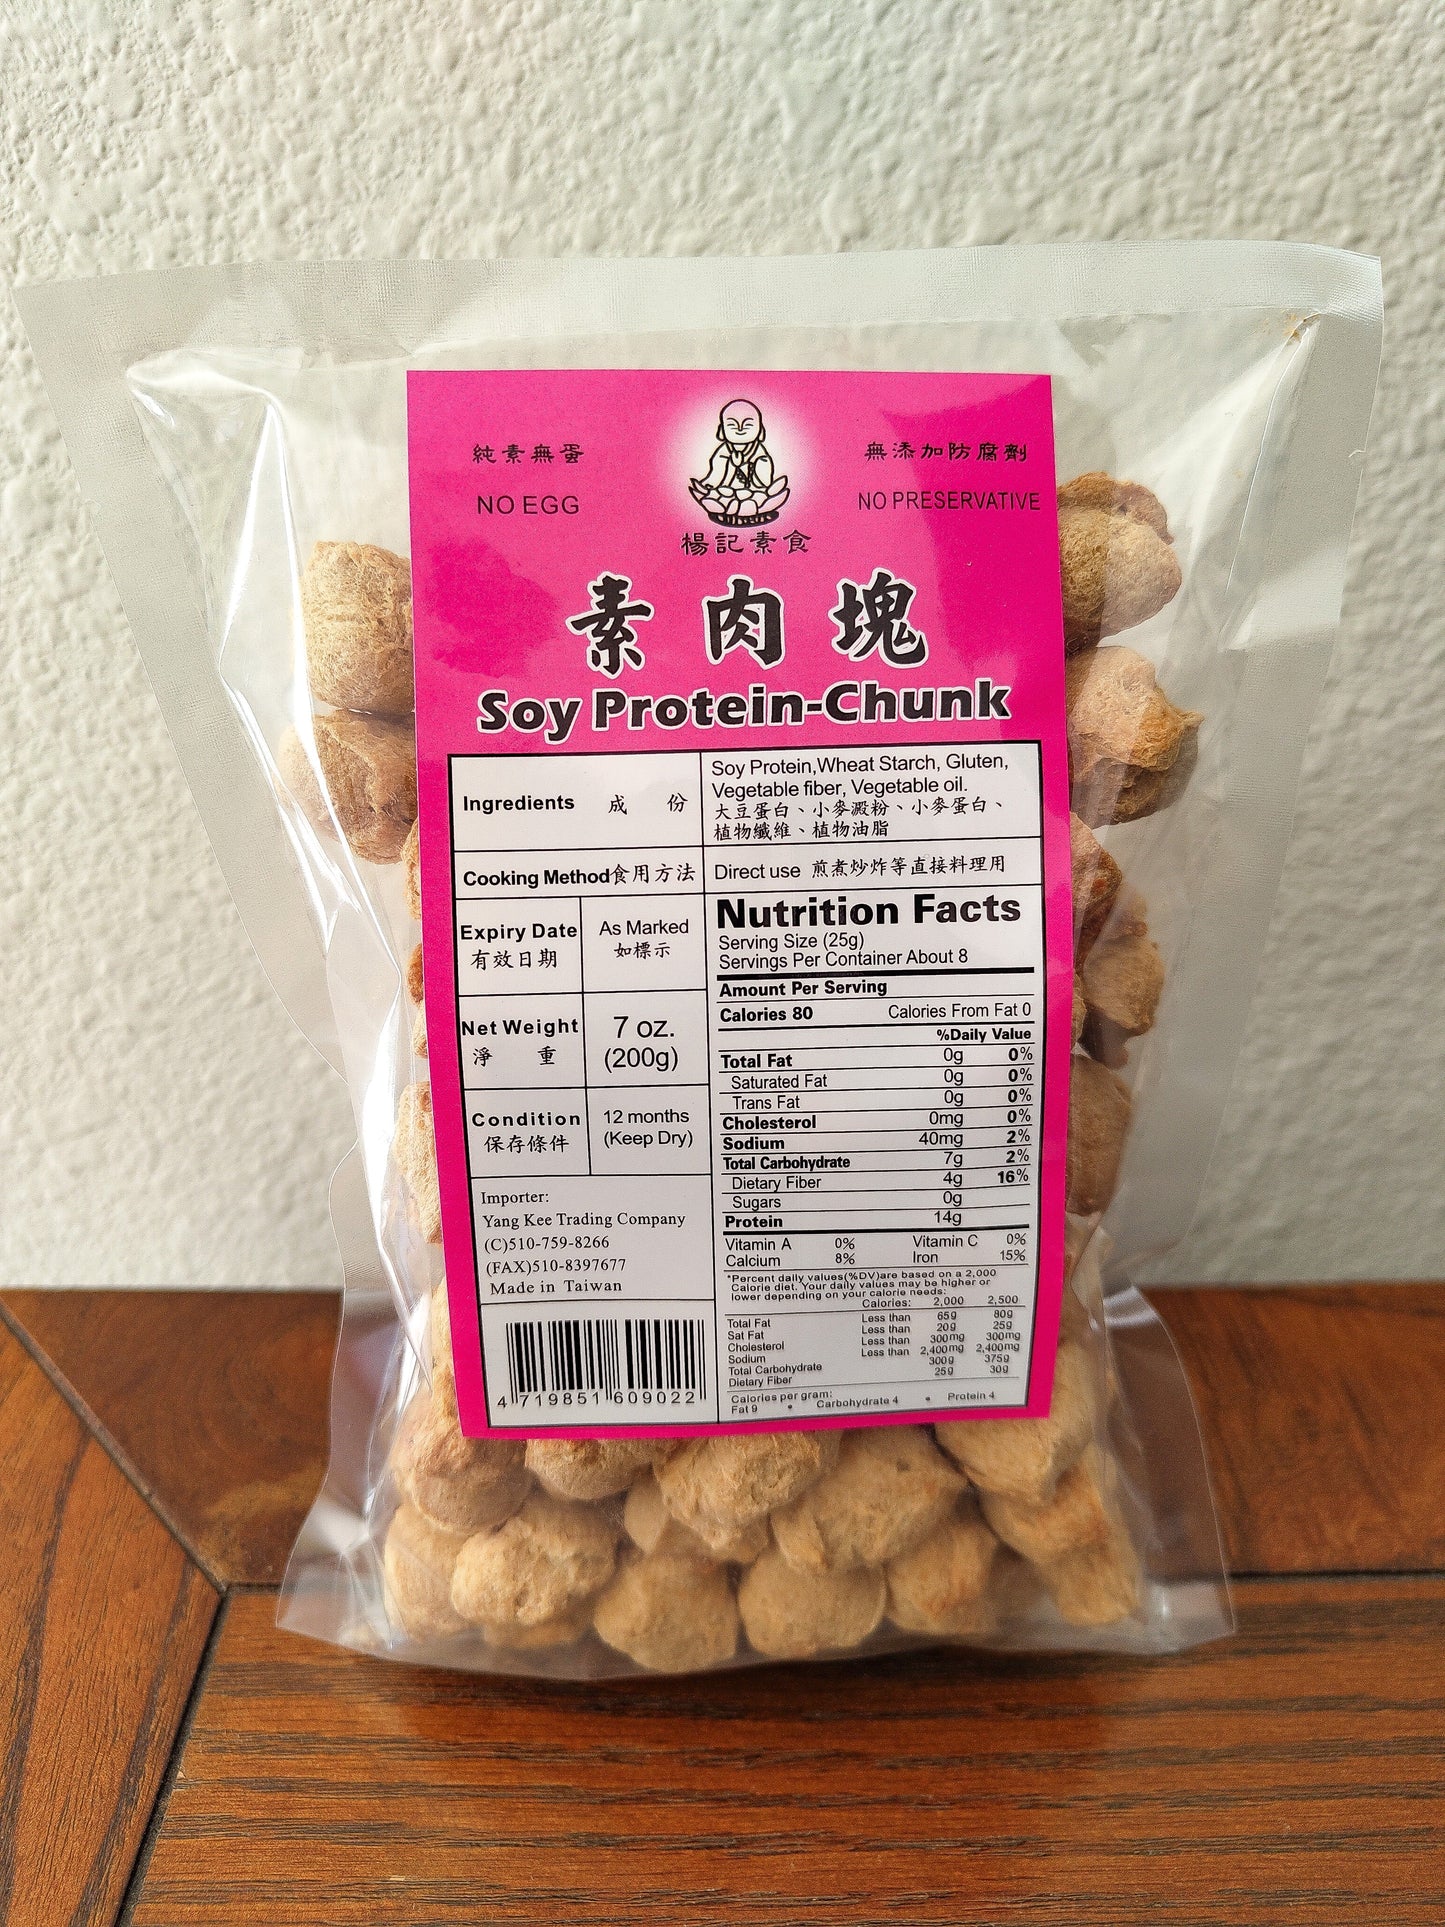 Textured Vegetable Protein (TVP) / Textured Soy Protein (TSP)